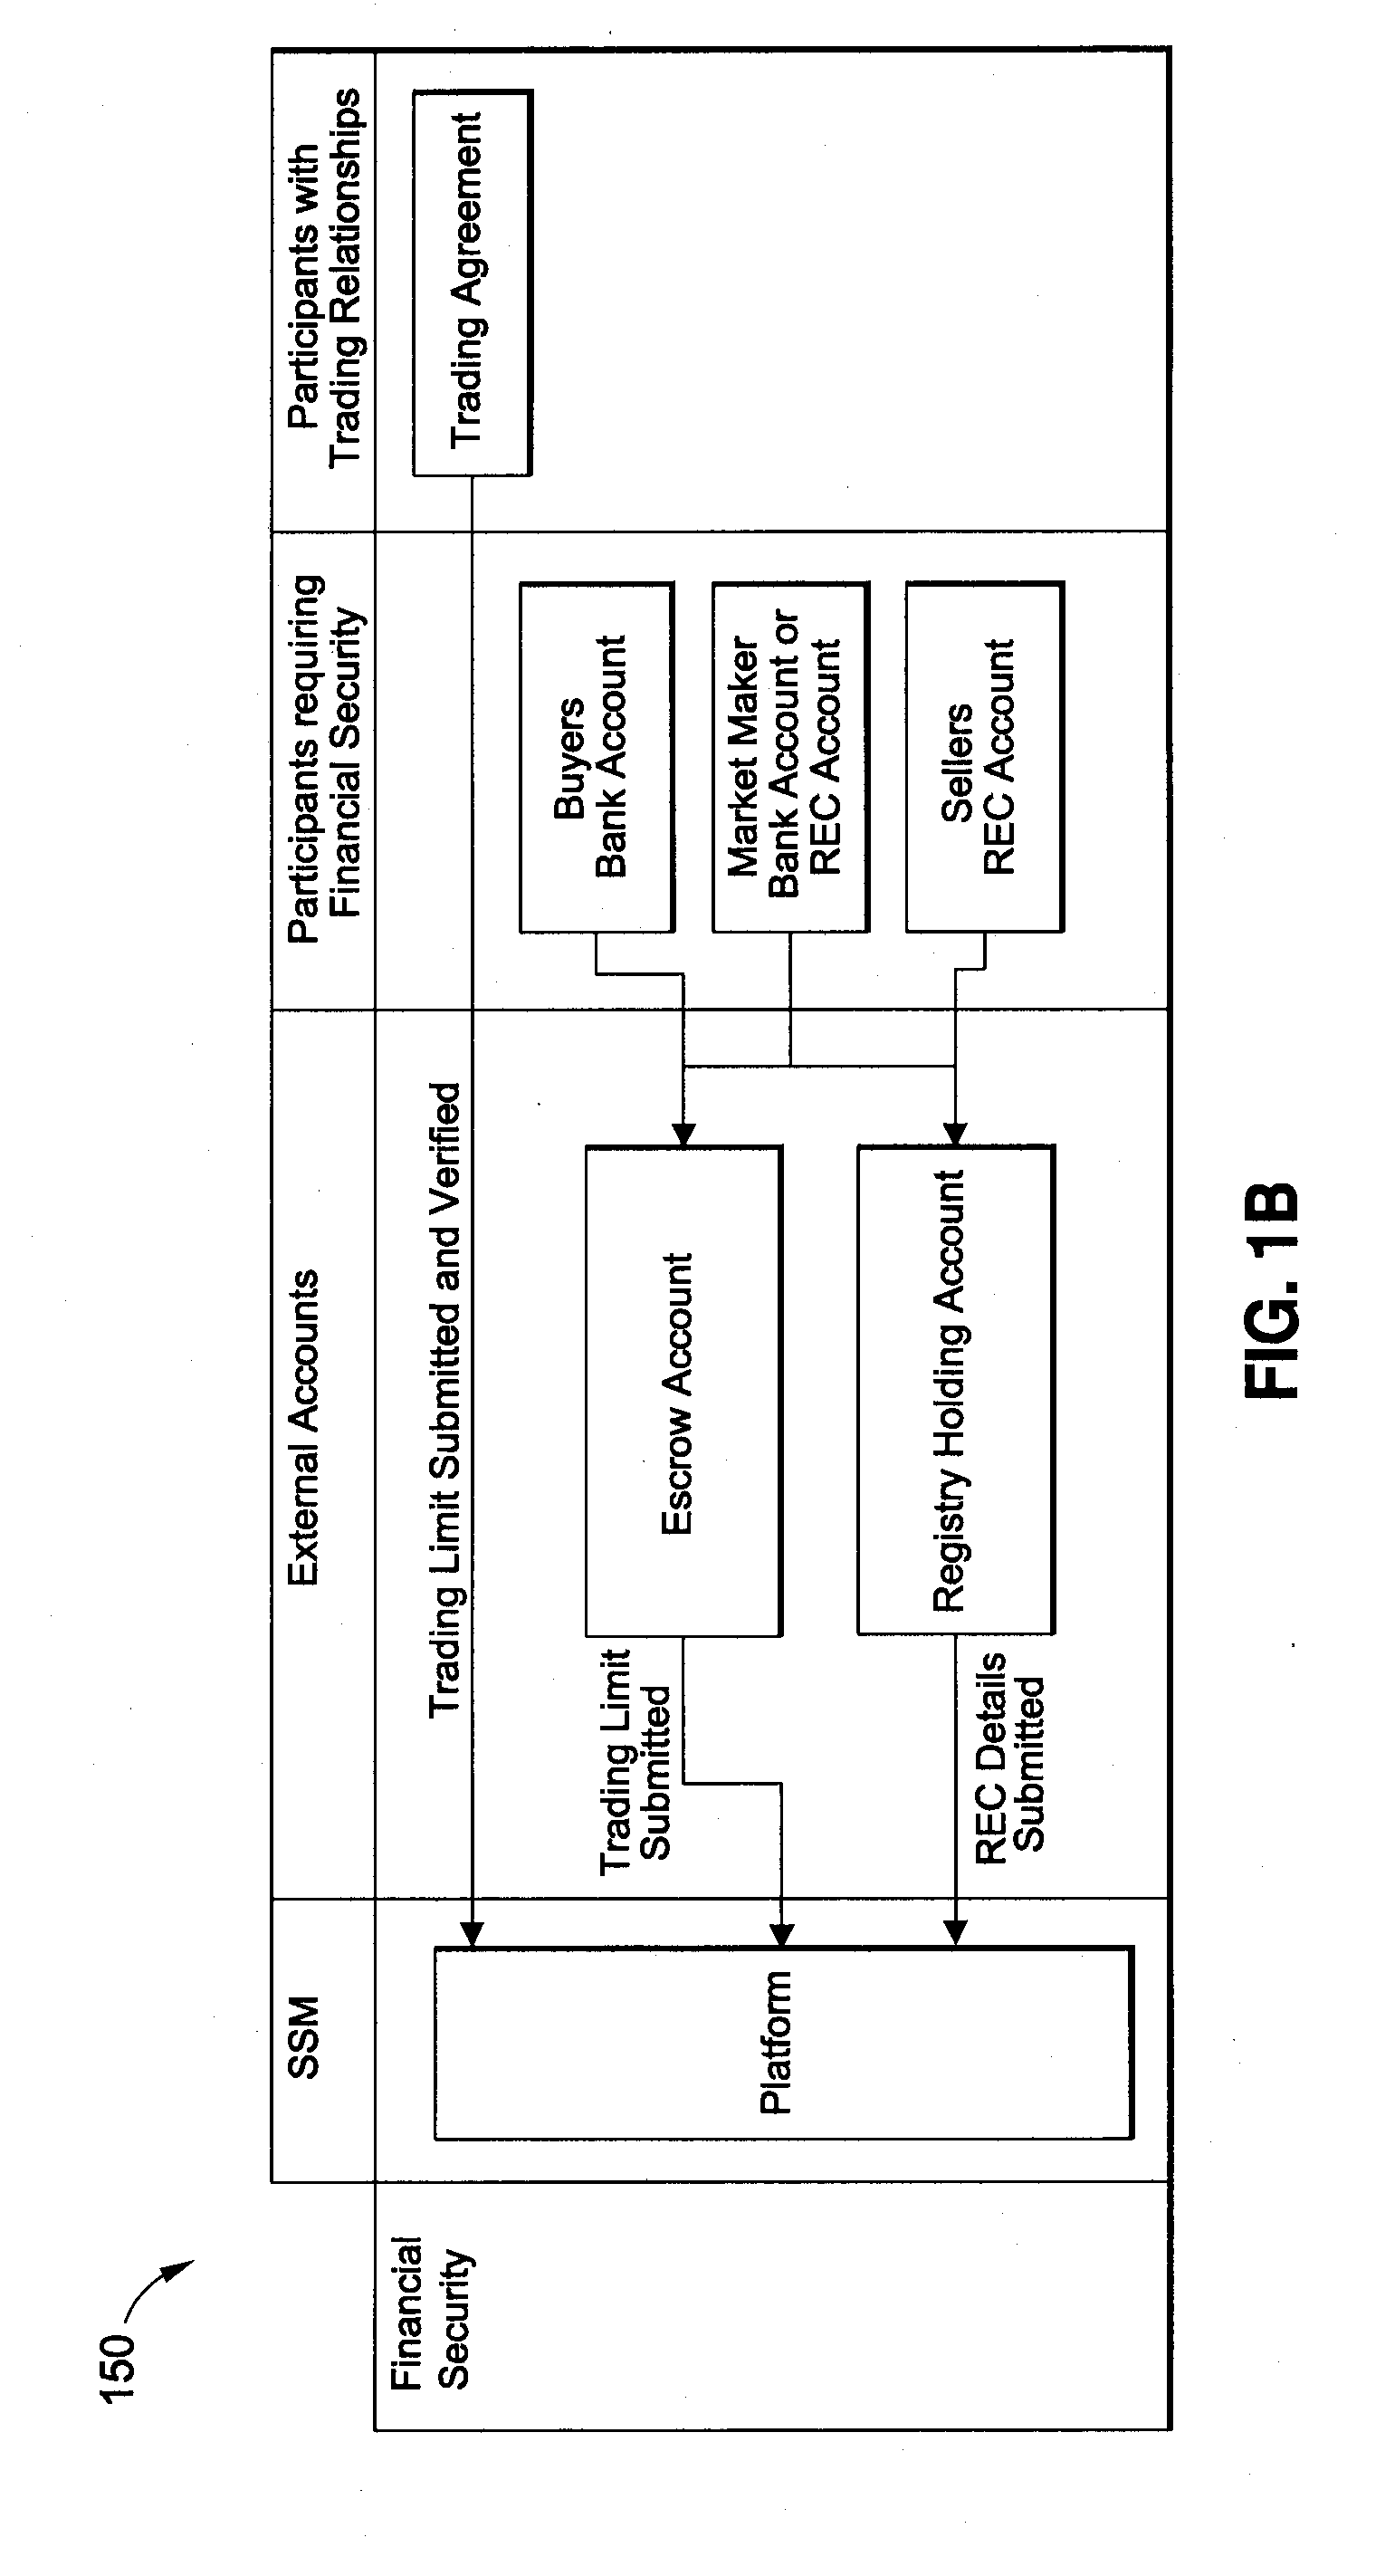 System and Method for Auctioning Environmental Commodities